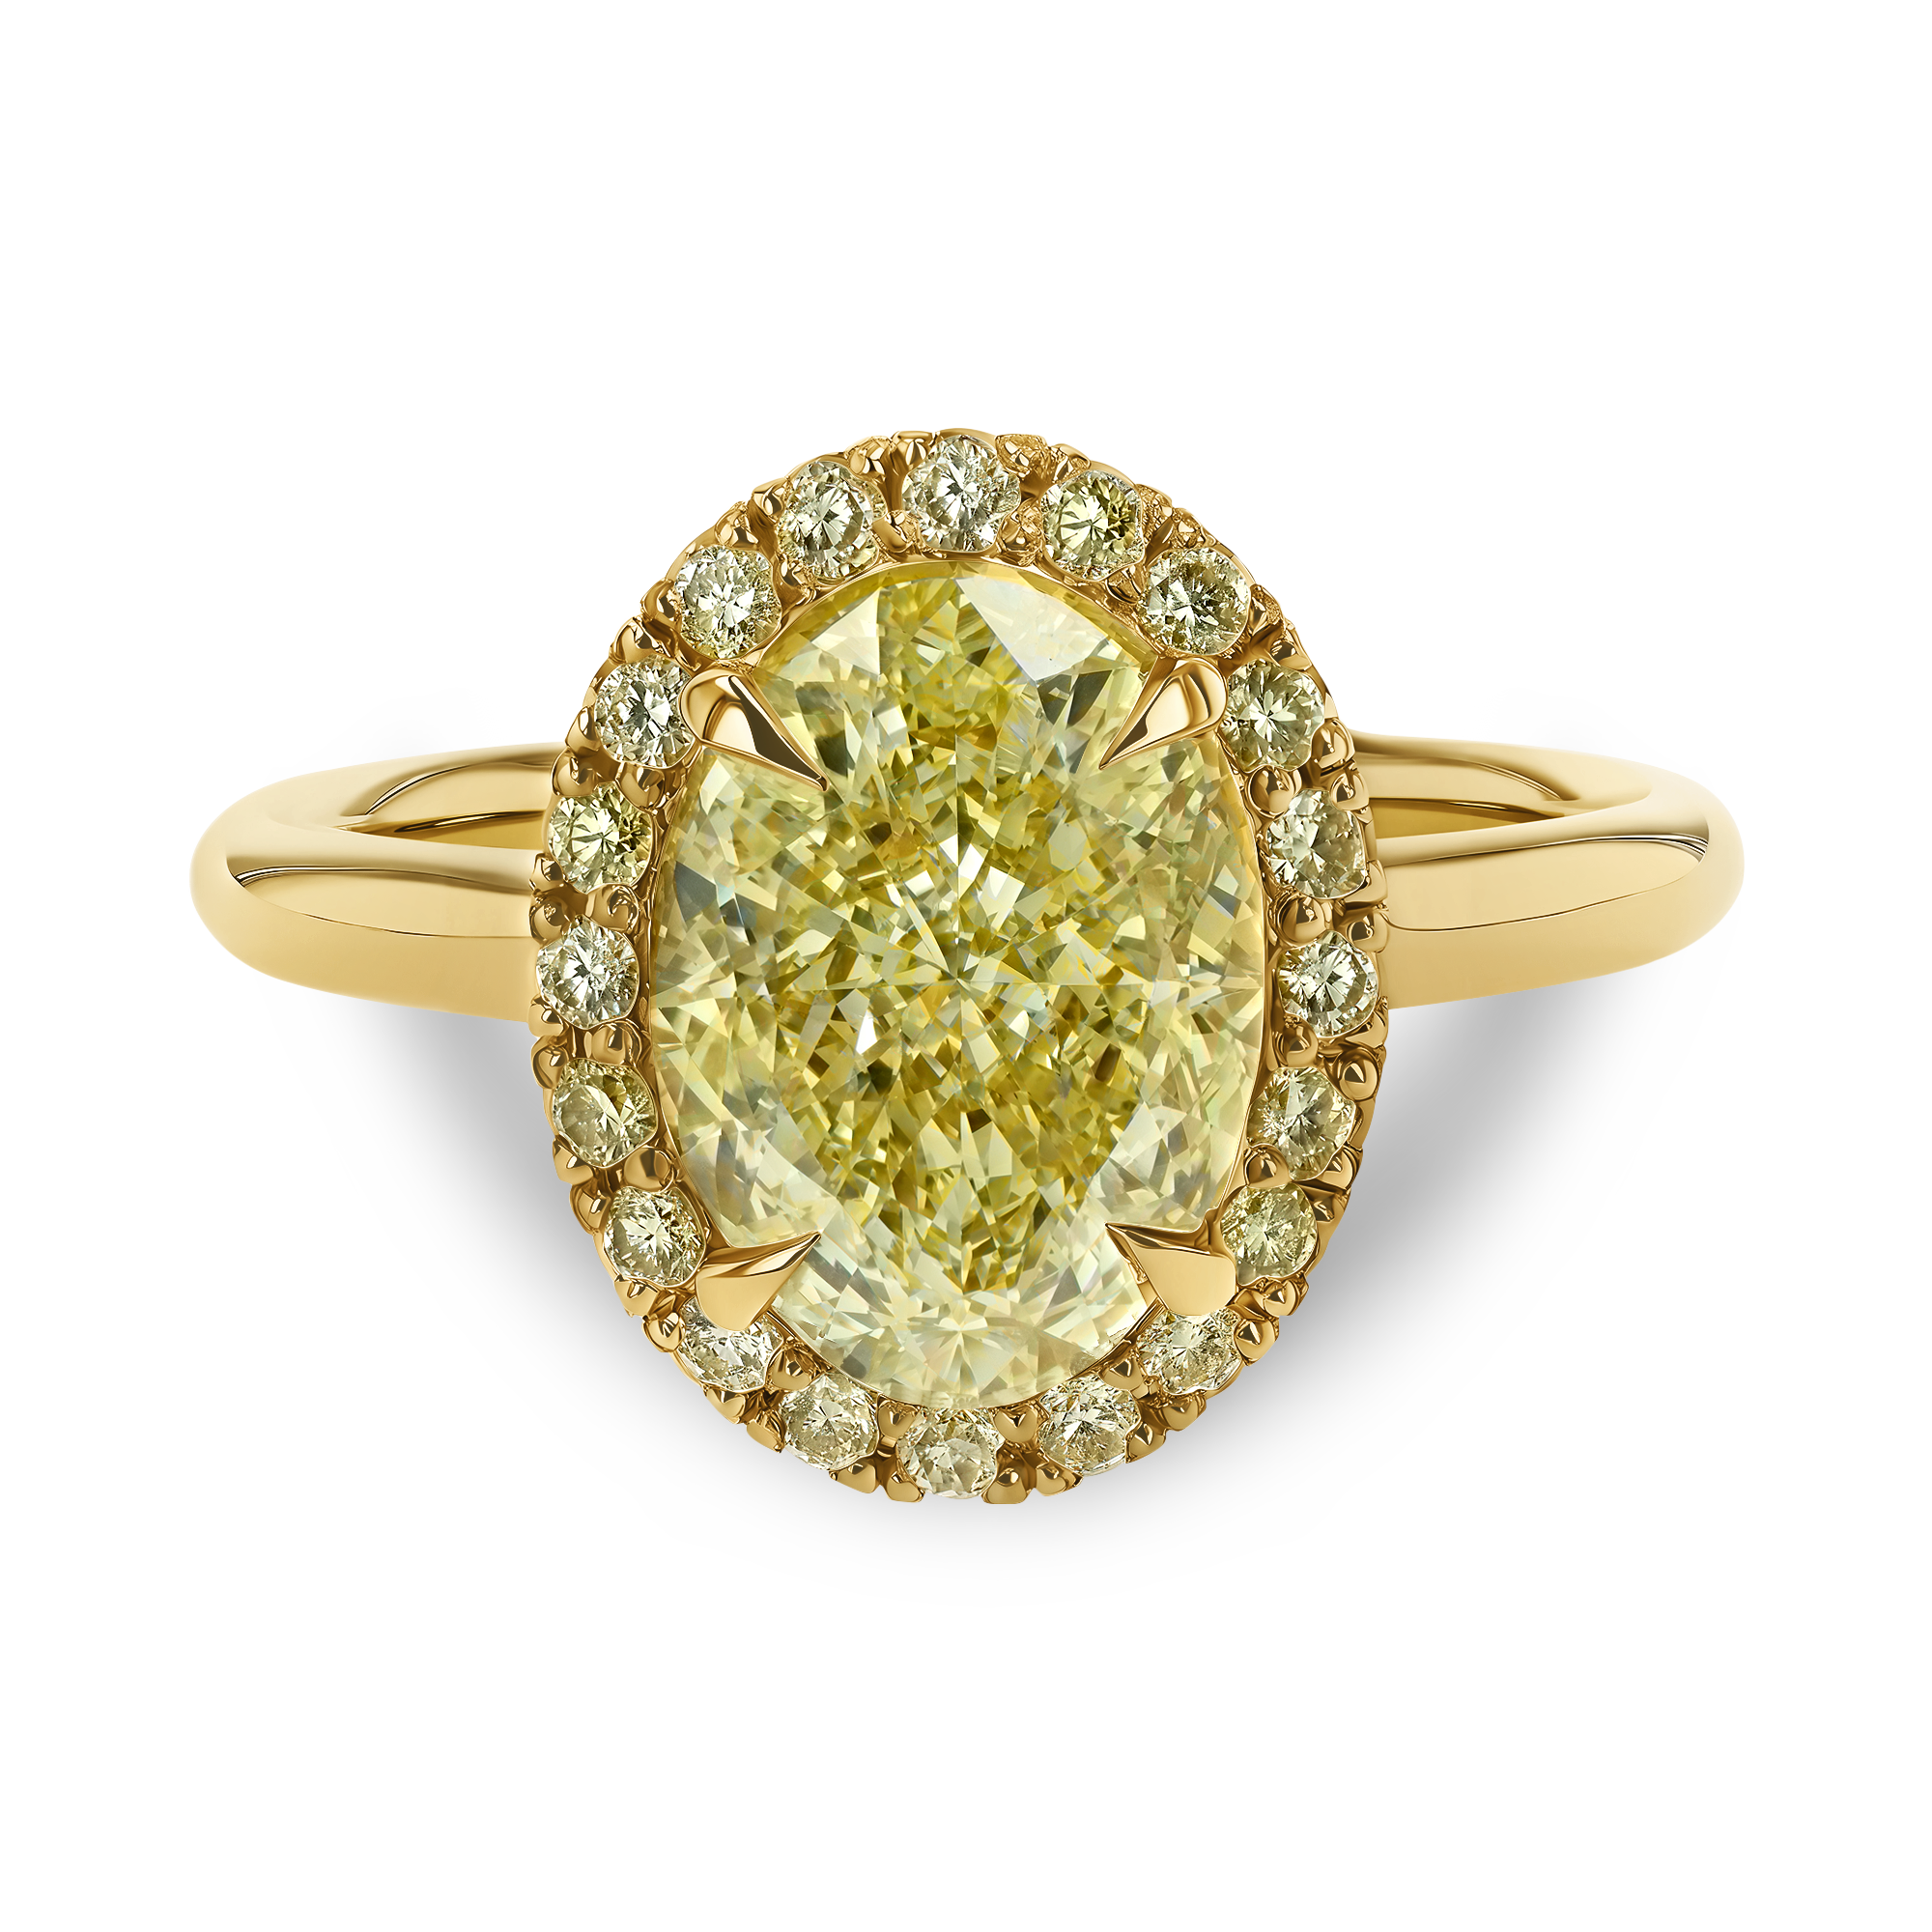 Celestial 3.01ct Fancy Yellow Diamond Cluster Ring Oval Cut, Claw Set_2